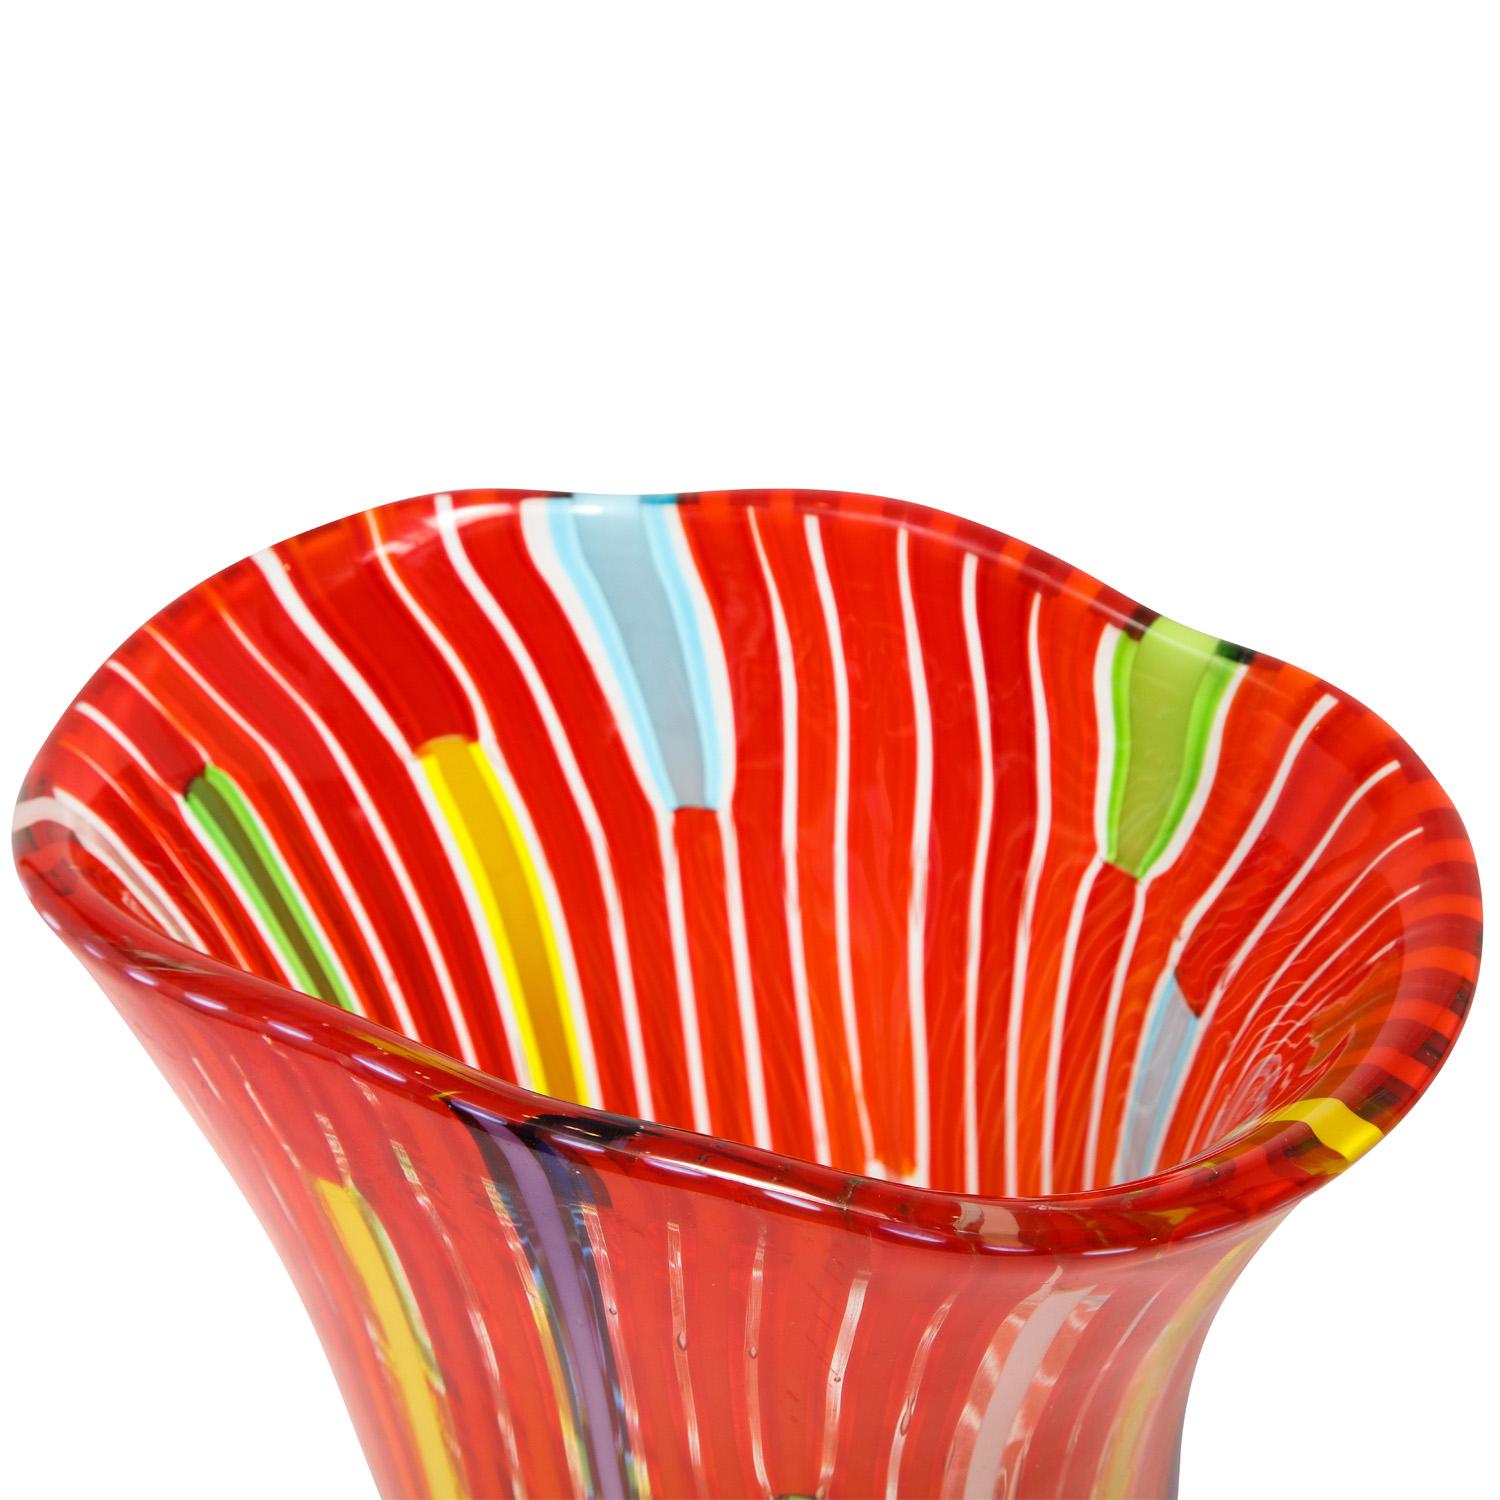 Italian Anzolo Fuga Hand-Blown Vase with Multicolor Vertical Rods 1955-56